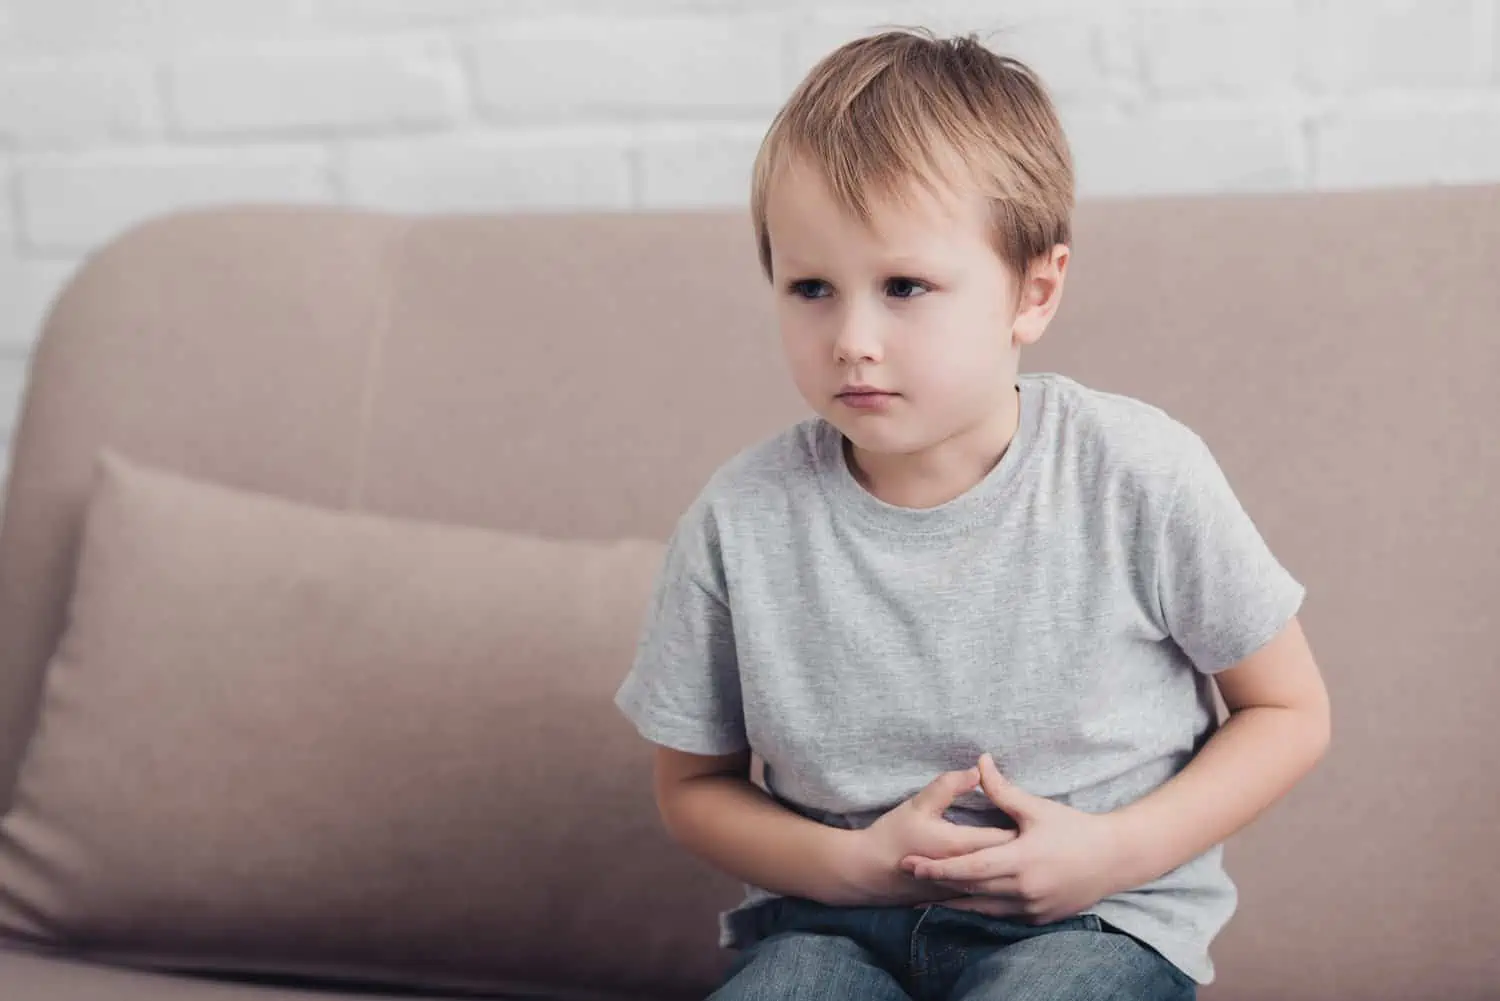 Young boy having constipation sitting on sofa